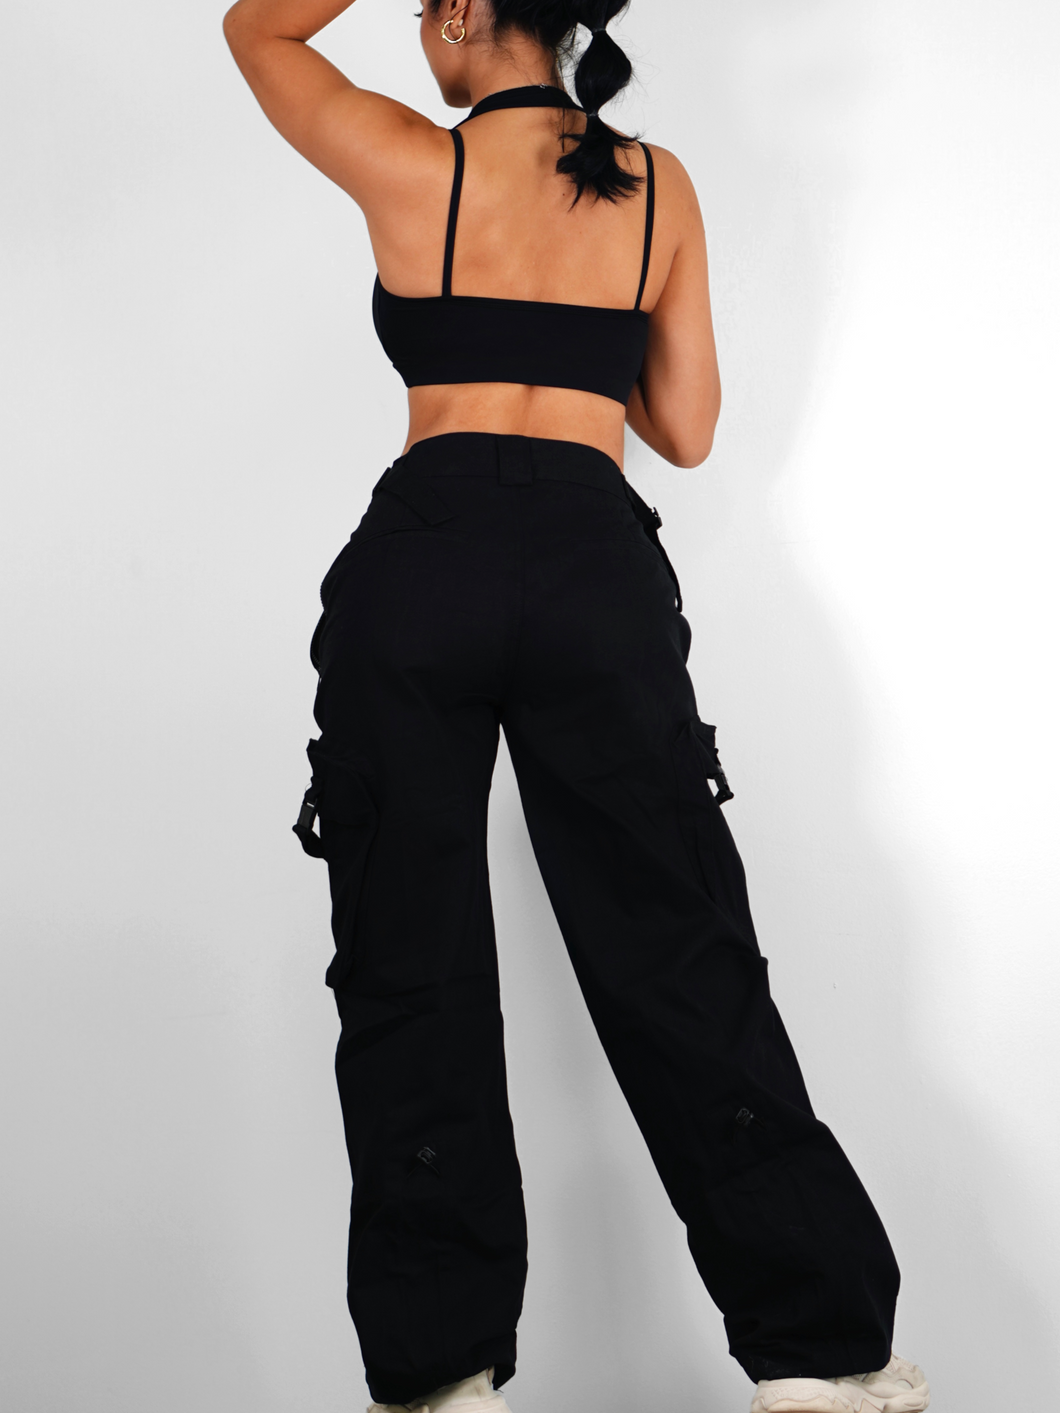 Snatched Cargo Pants (Black) – Fitness Fashioness